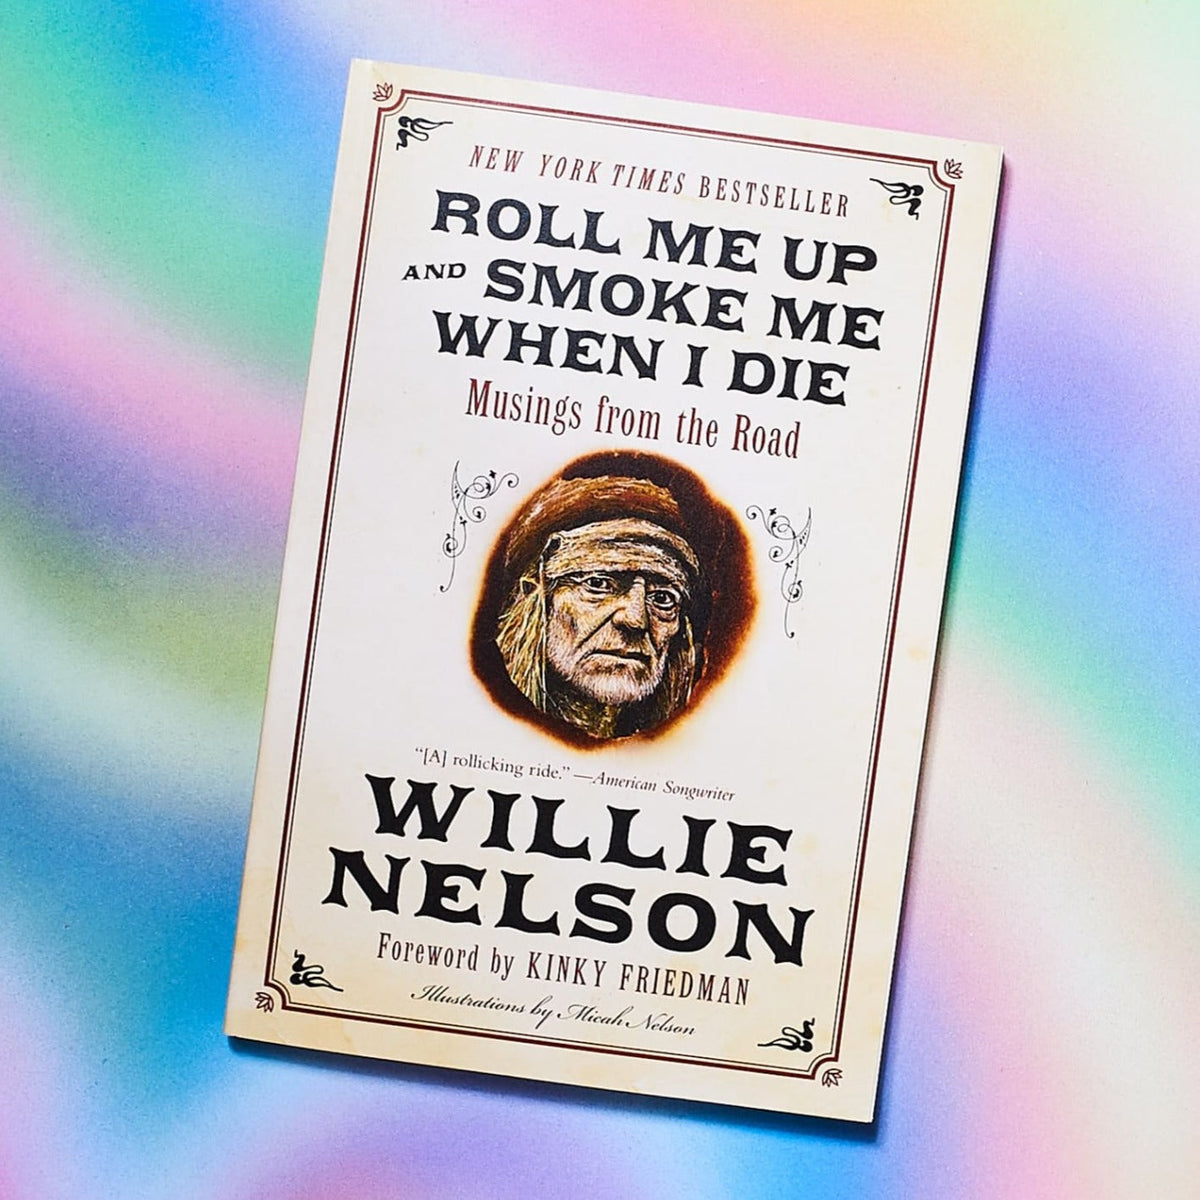 Roll me up and Smoke Willie Nelson 420 - Fathersday - Smoke